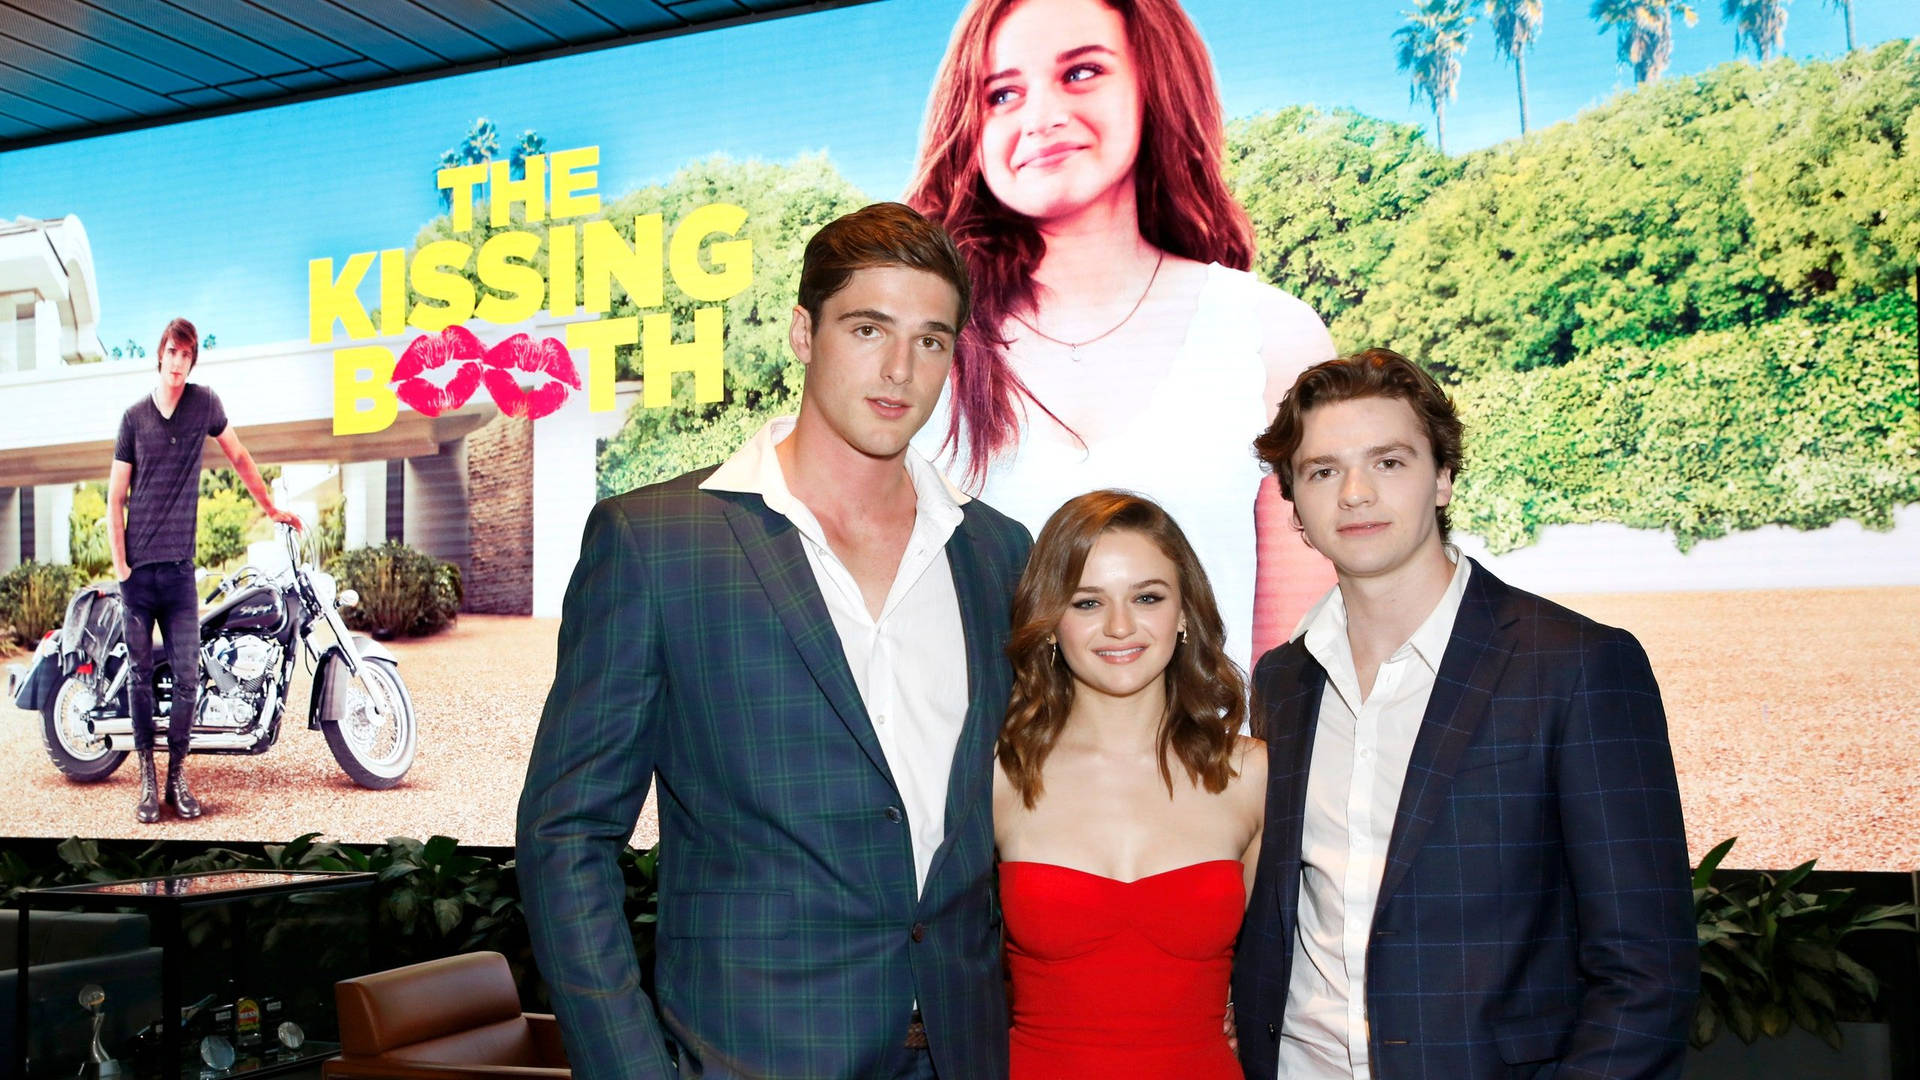 The Kissing Booth Screening Premiere